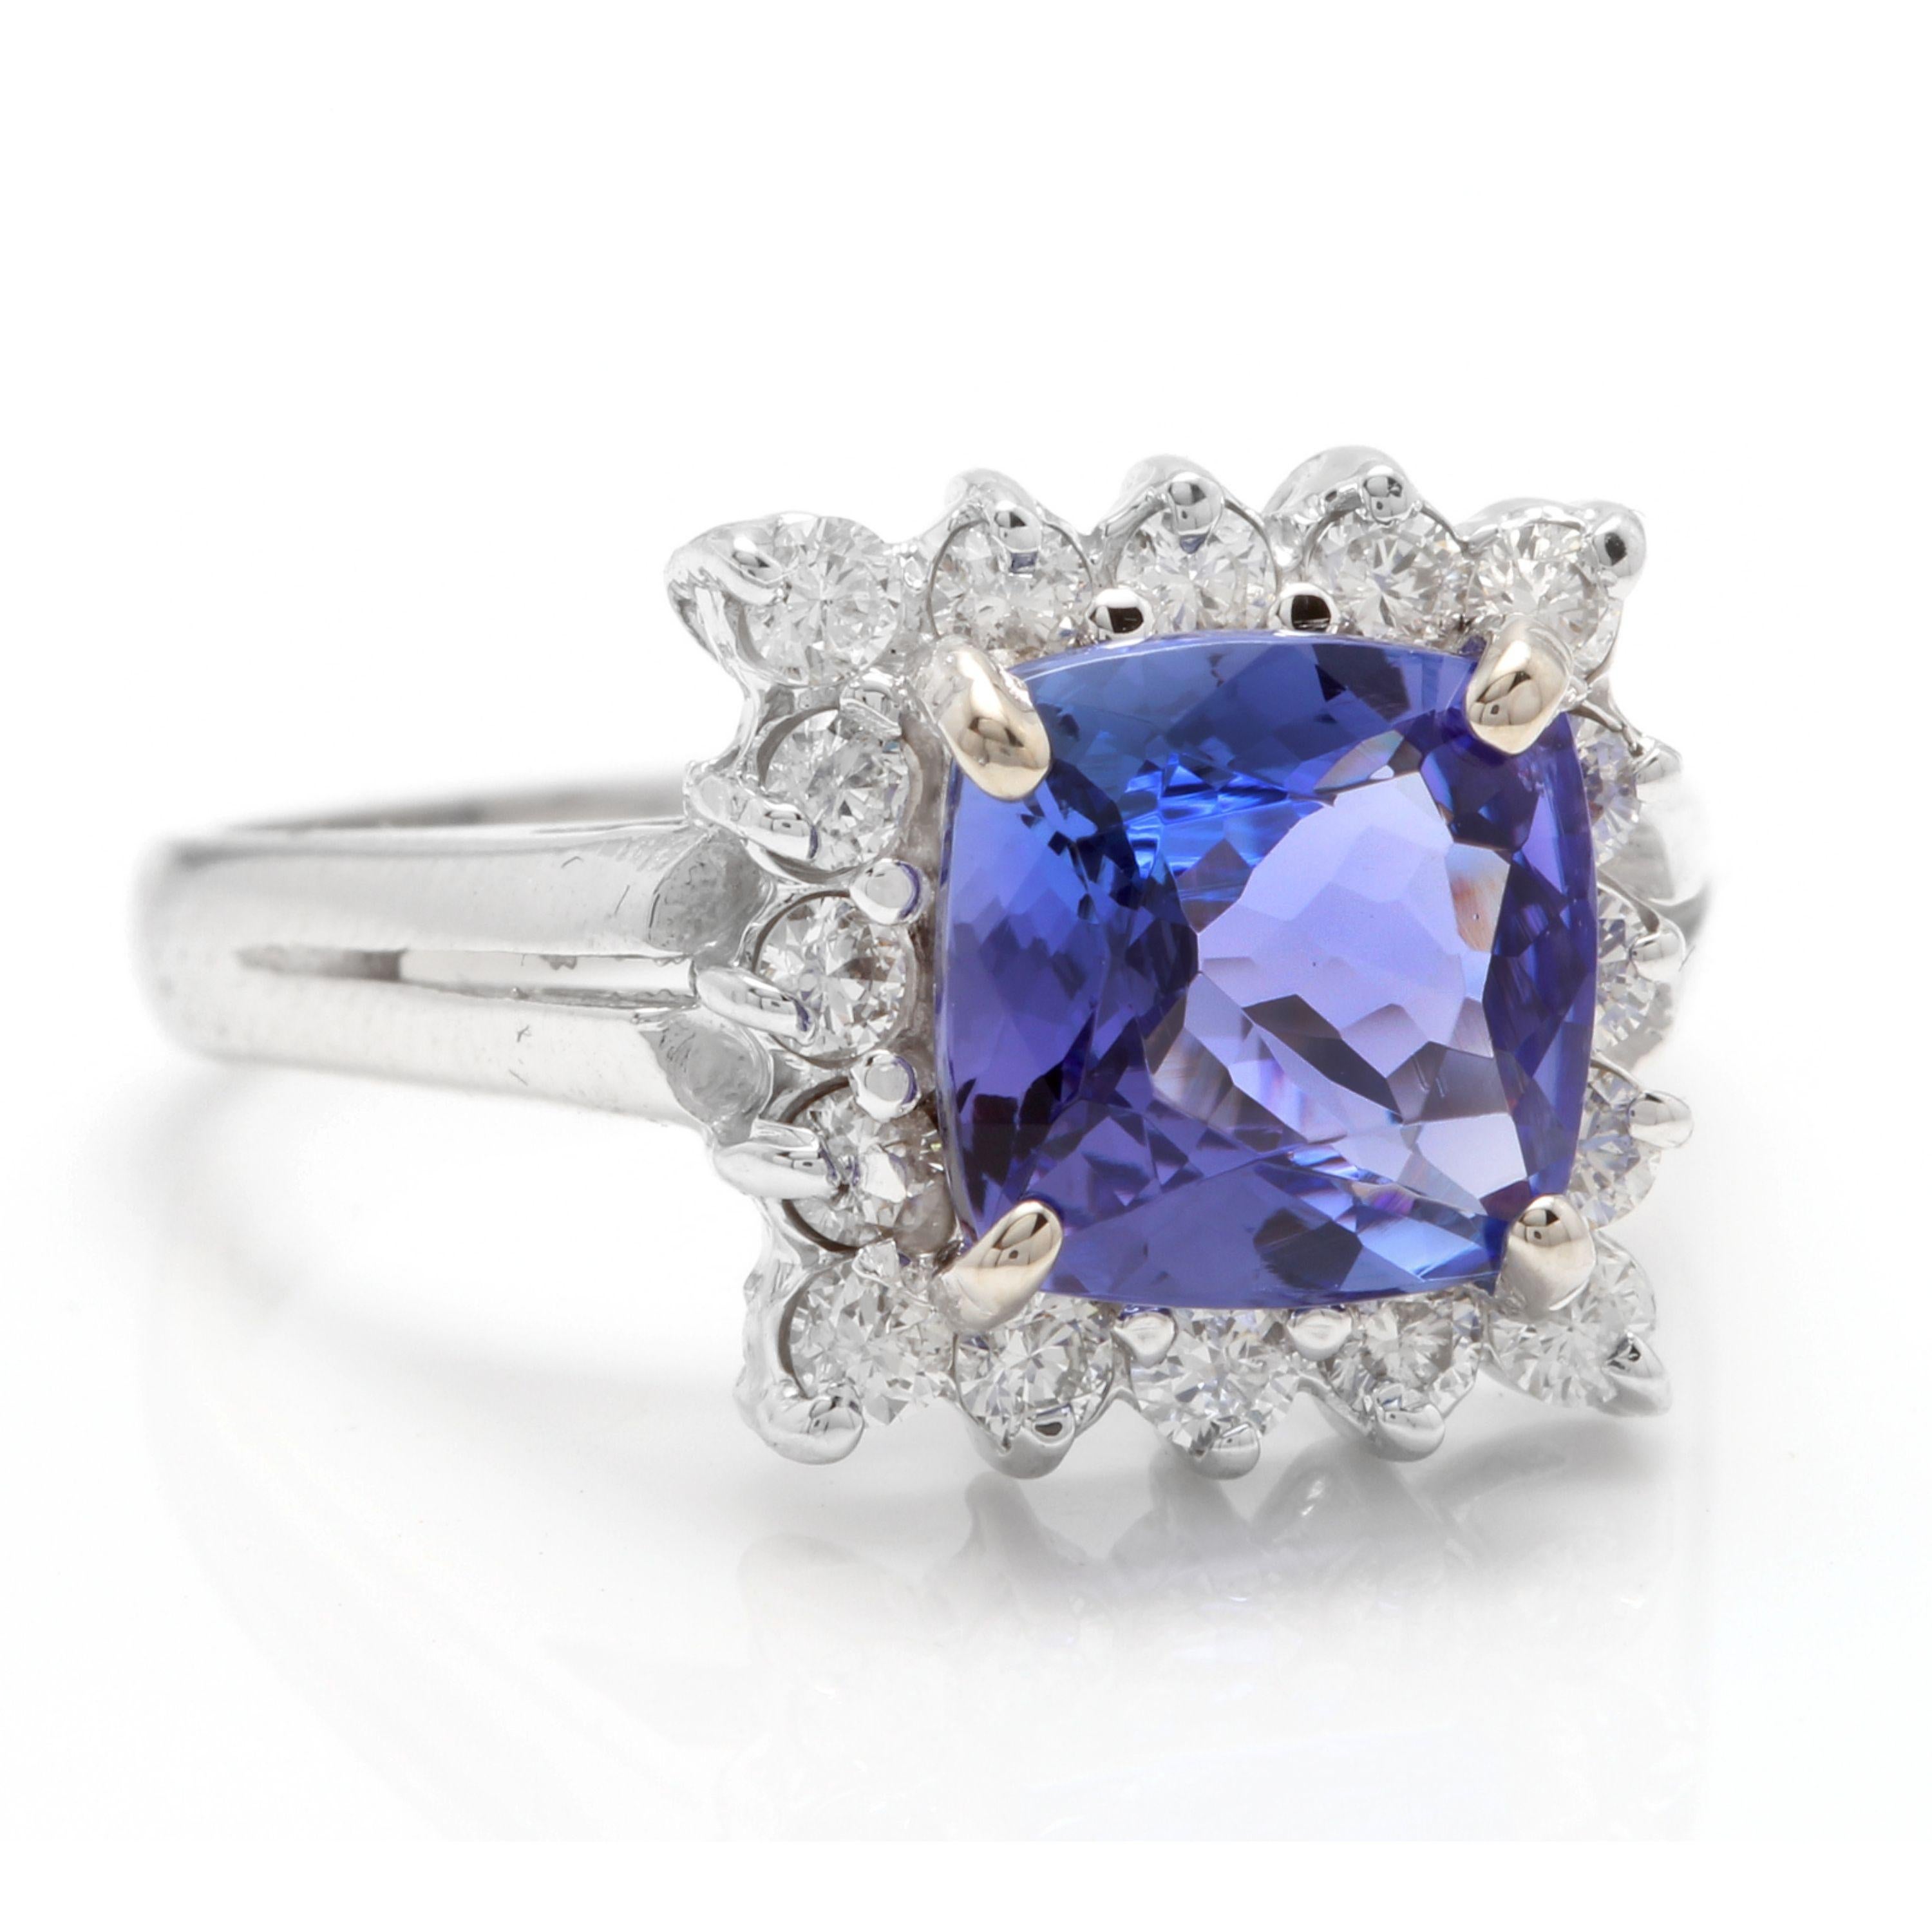 3.00 Carats Natural Very Nice Looking Tanzanite and Diamond 14K Solid White Gold Ring

Total Natural Cushion Cut Tanzanite Weight is: Approx. 2.50 Carats

Tanzanite Measures: 8.00 x 8.00mm

Natural Round Diamonds Weight: Approx. 0.50 Carats (color